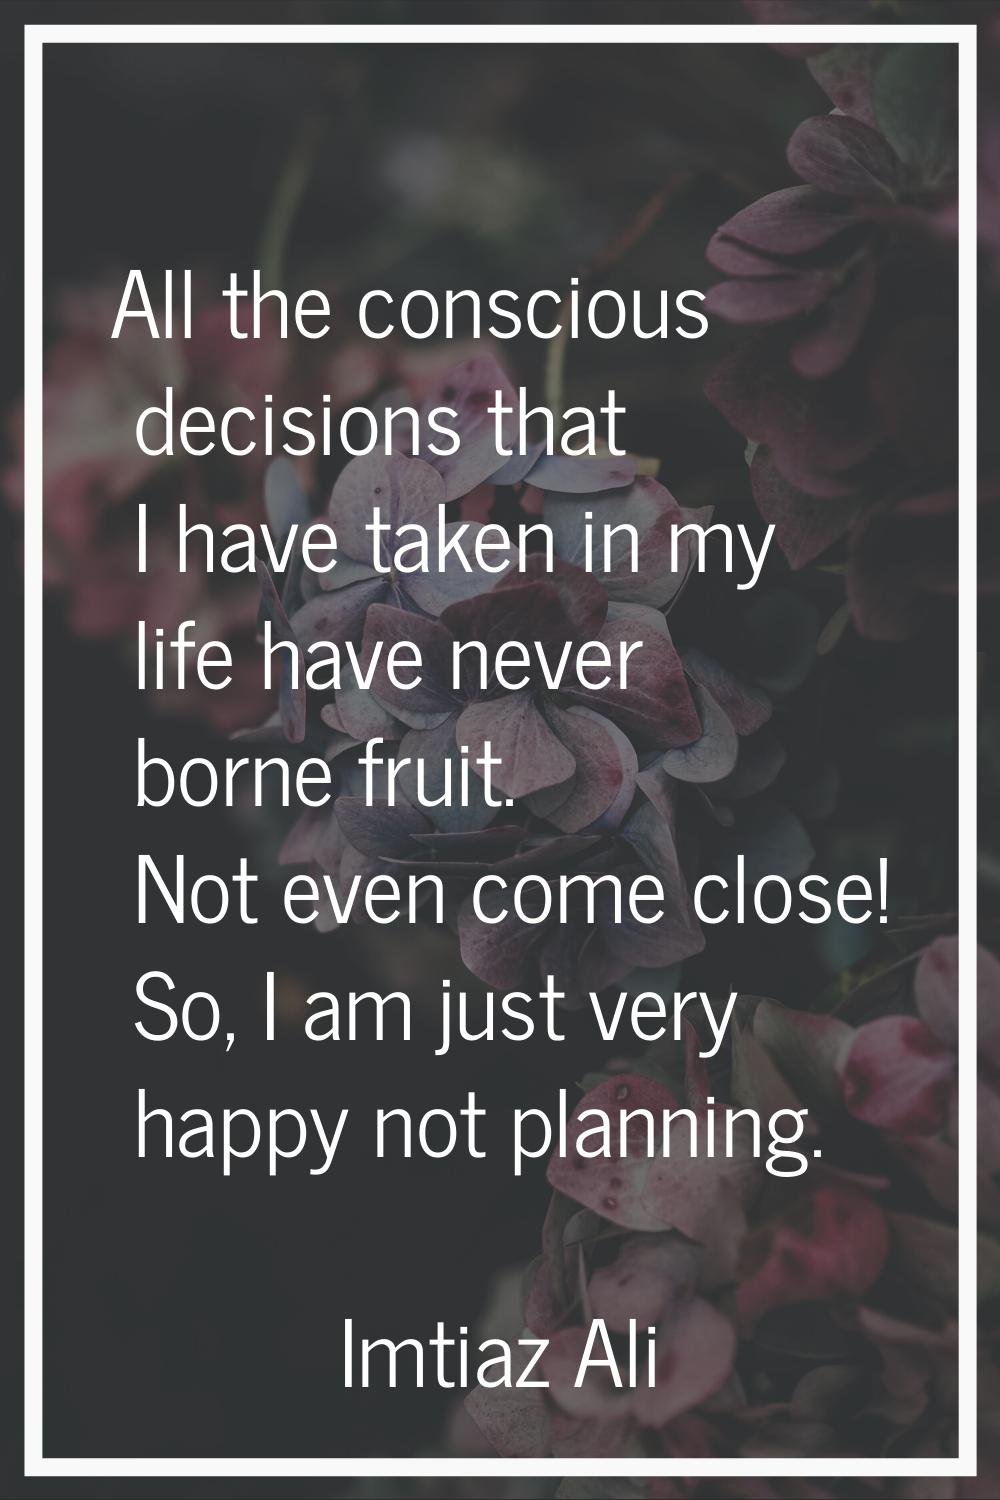 All the conscious decisions that I have taken in my life have never borne fruit. Not even come clos